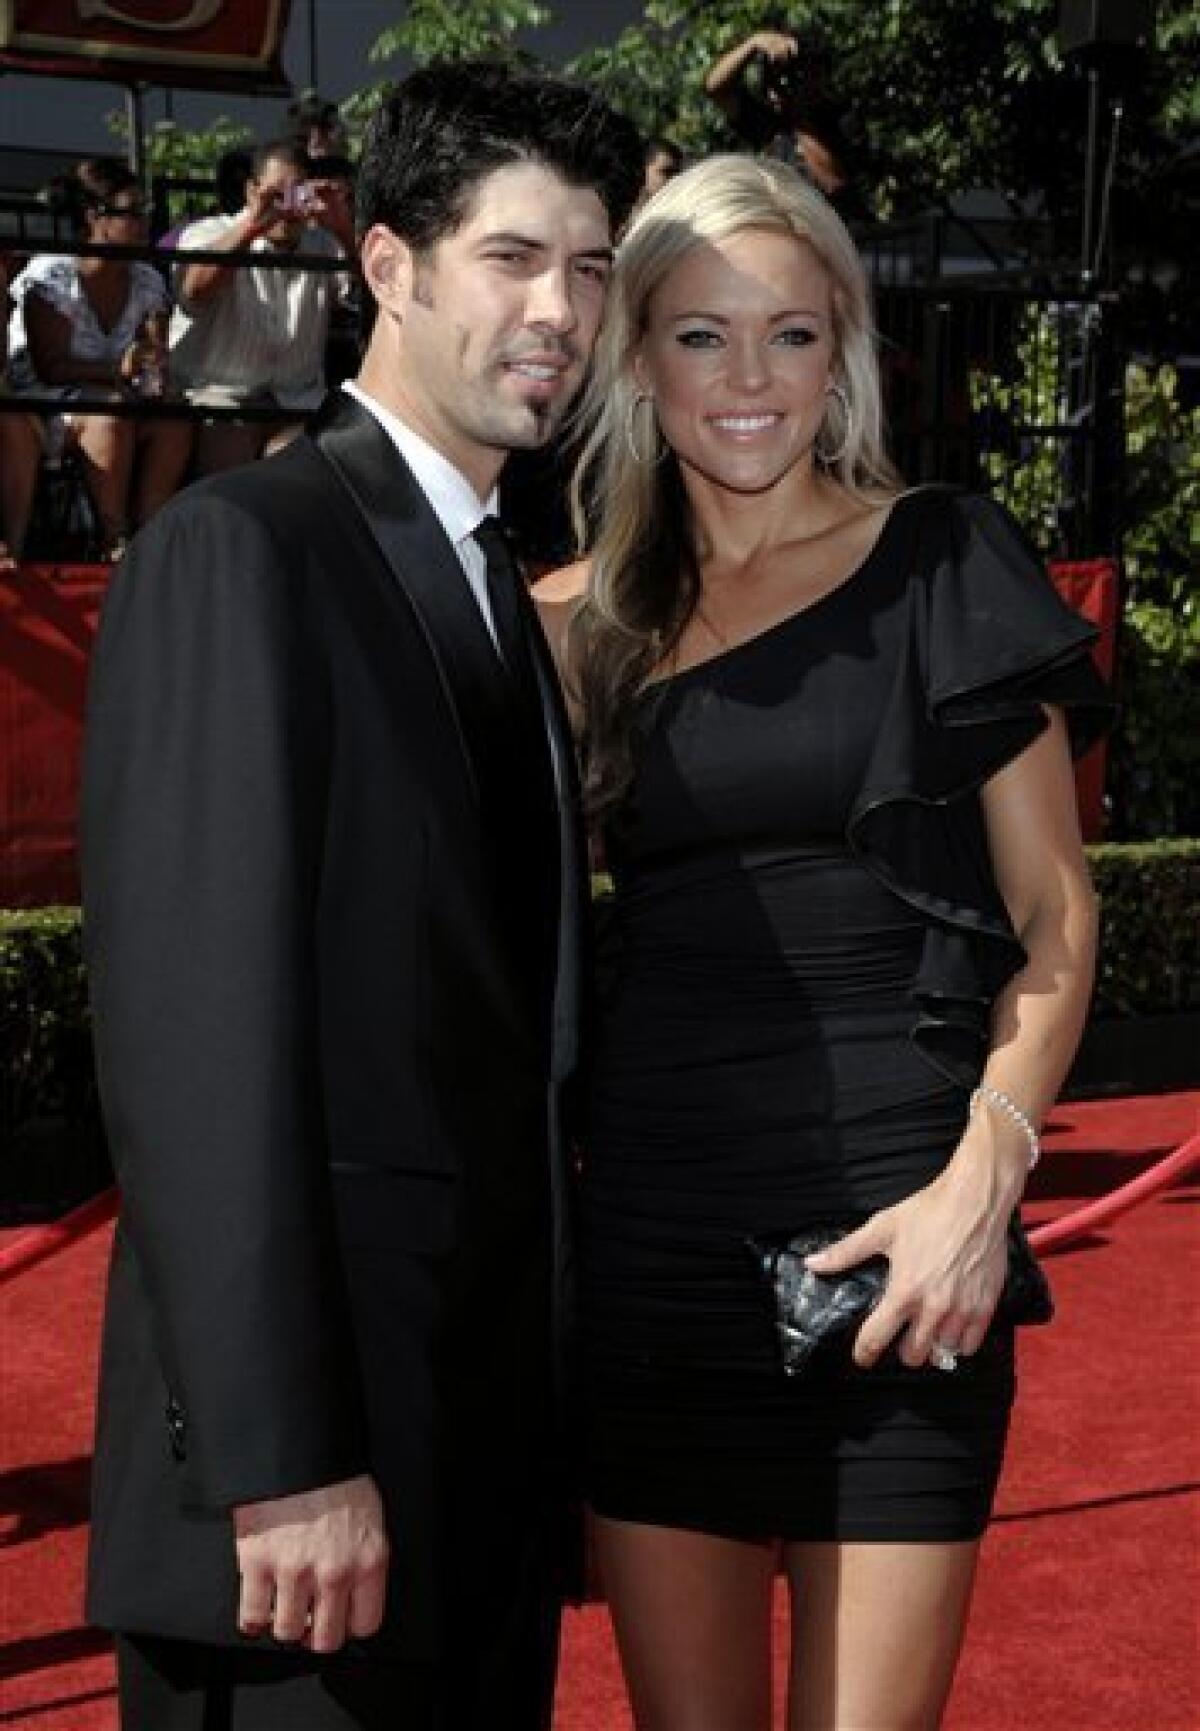 Jennie Finch, right, and Casey Daigle arrive at the ESPY Awards on Wednesday, July 14, 2010 in Los Angeles. (AP Photo/Dan Steinberg)